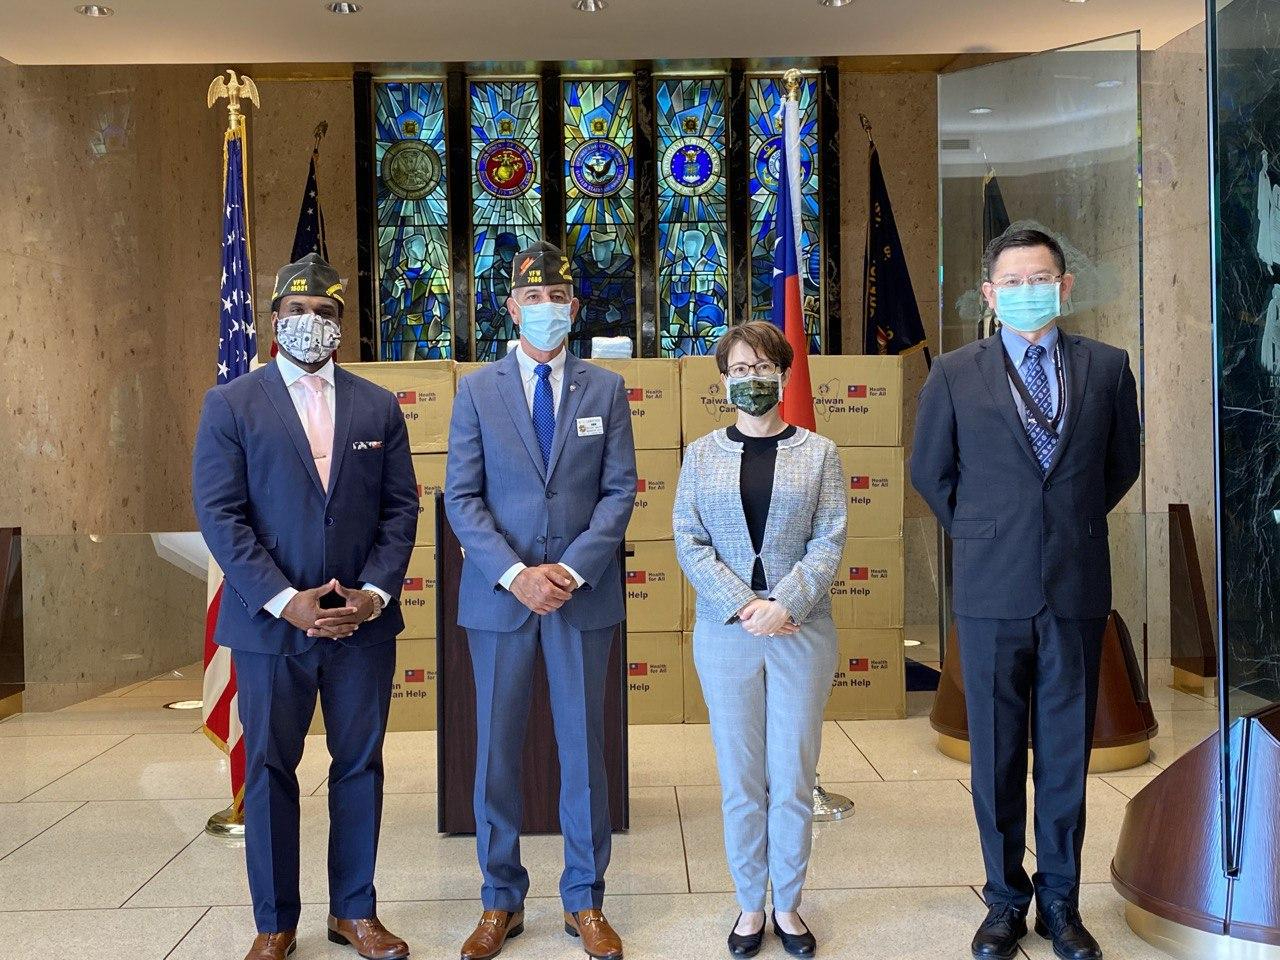 Taiwan Representative Bi-khim Hsiao presented a donation of 250,000 surgical masks to the Veterans of Foreign Wars (VFW) on October 29.